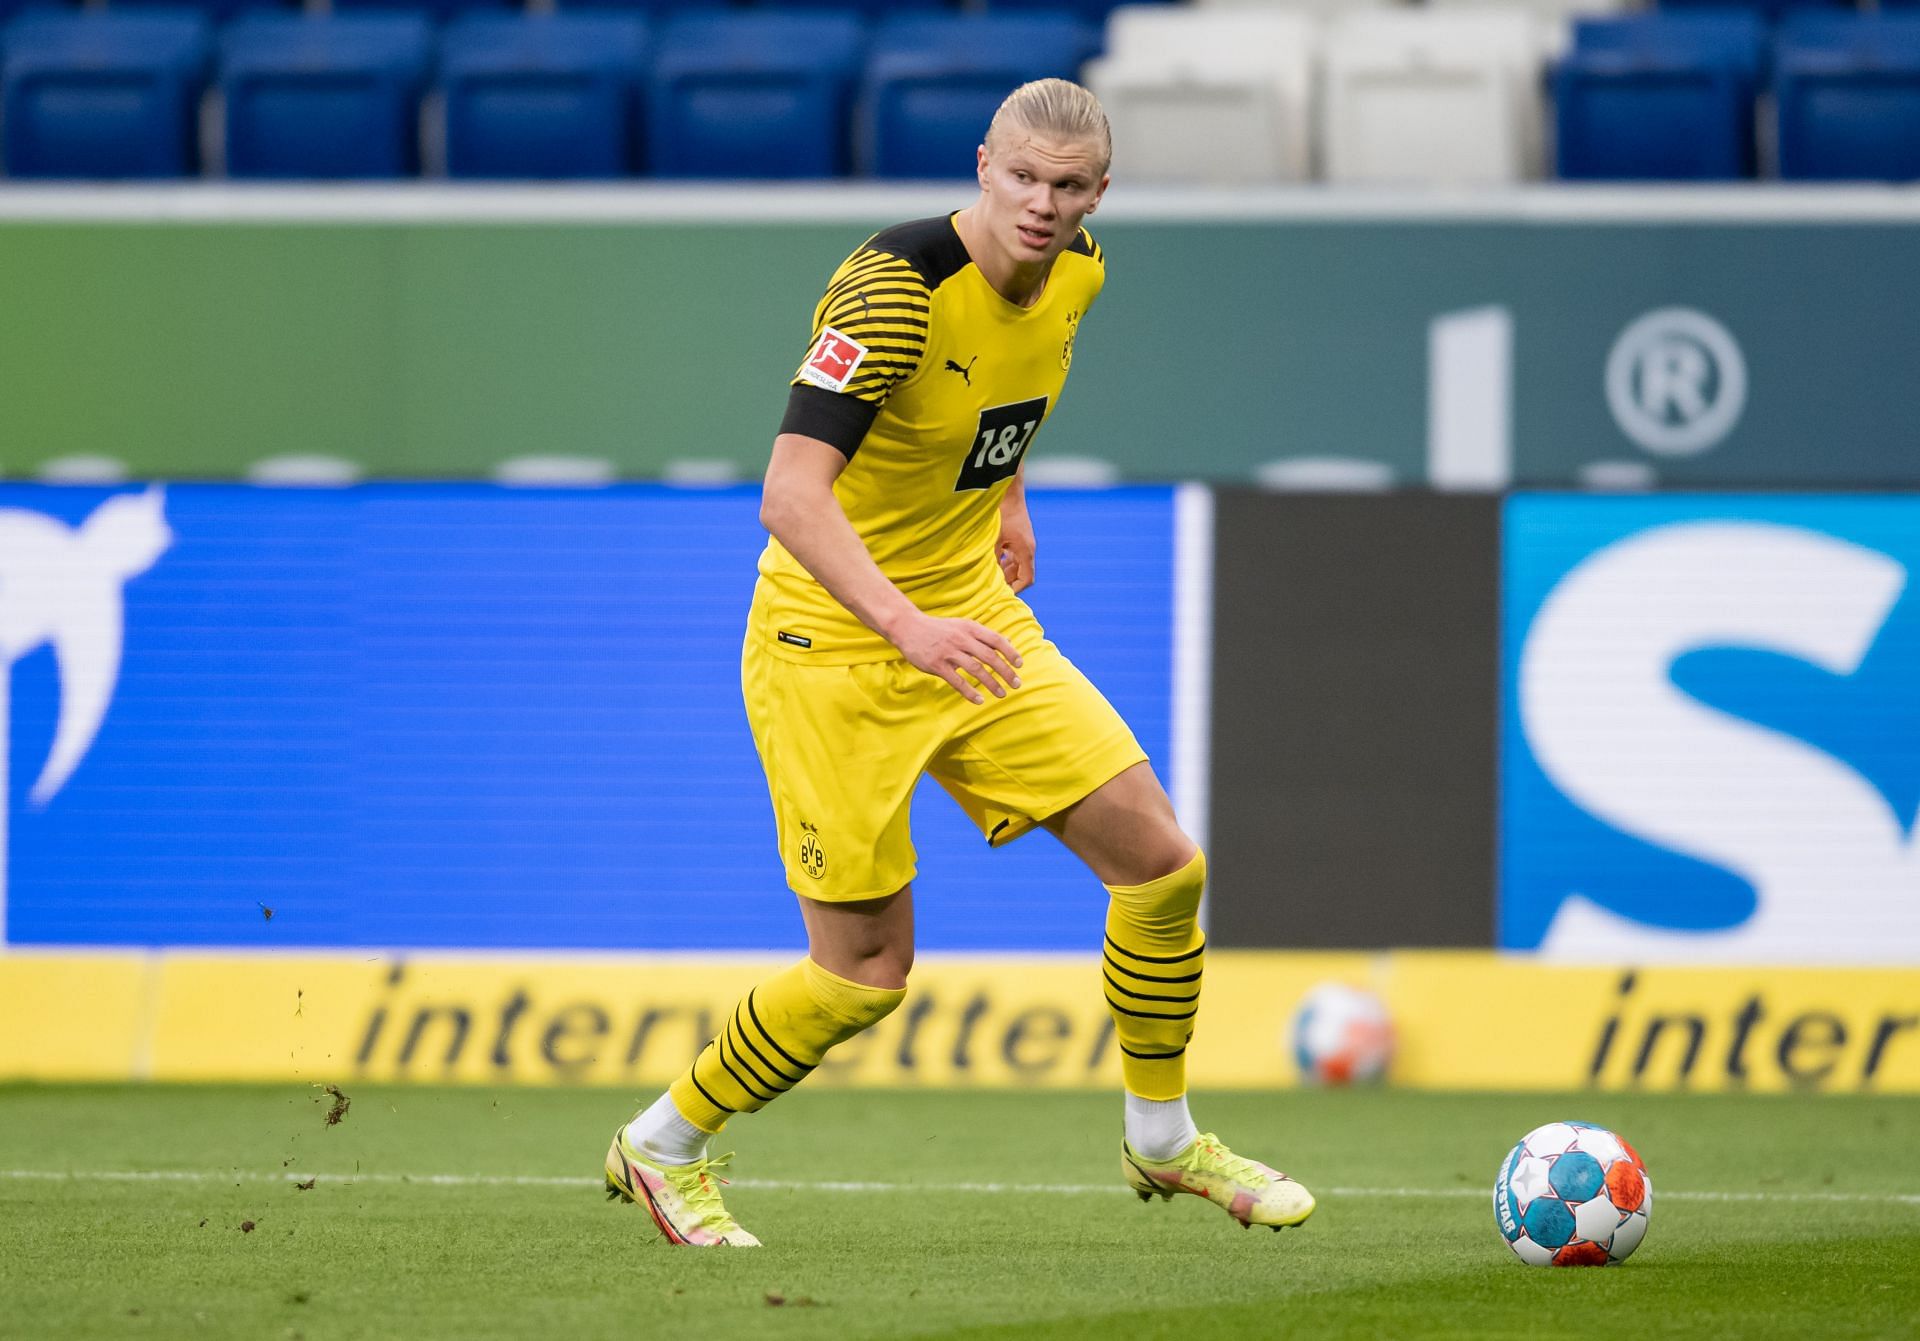 Manchester City are leading the race to sign Erling Haaland.